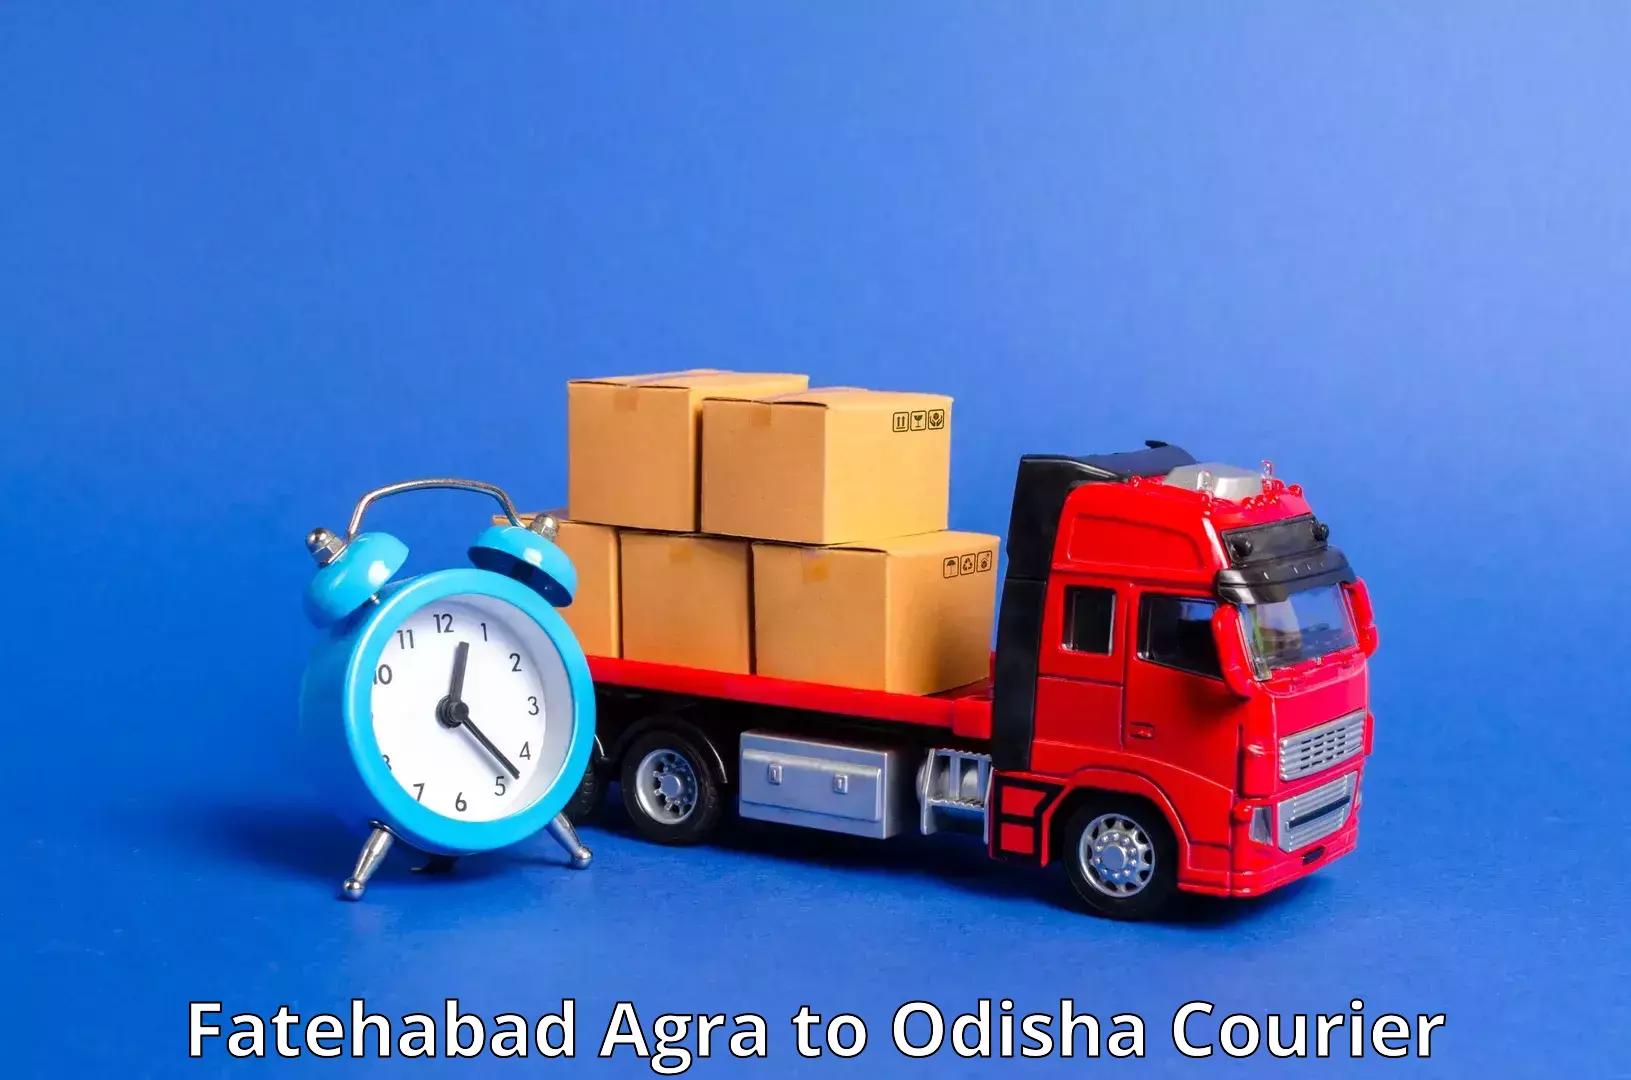 Cash on delivery service Fatehabad Agra to Sinapali